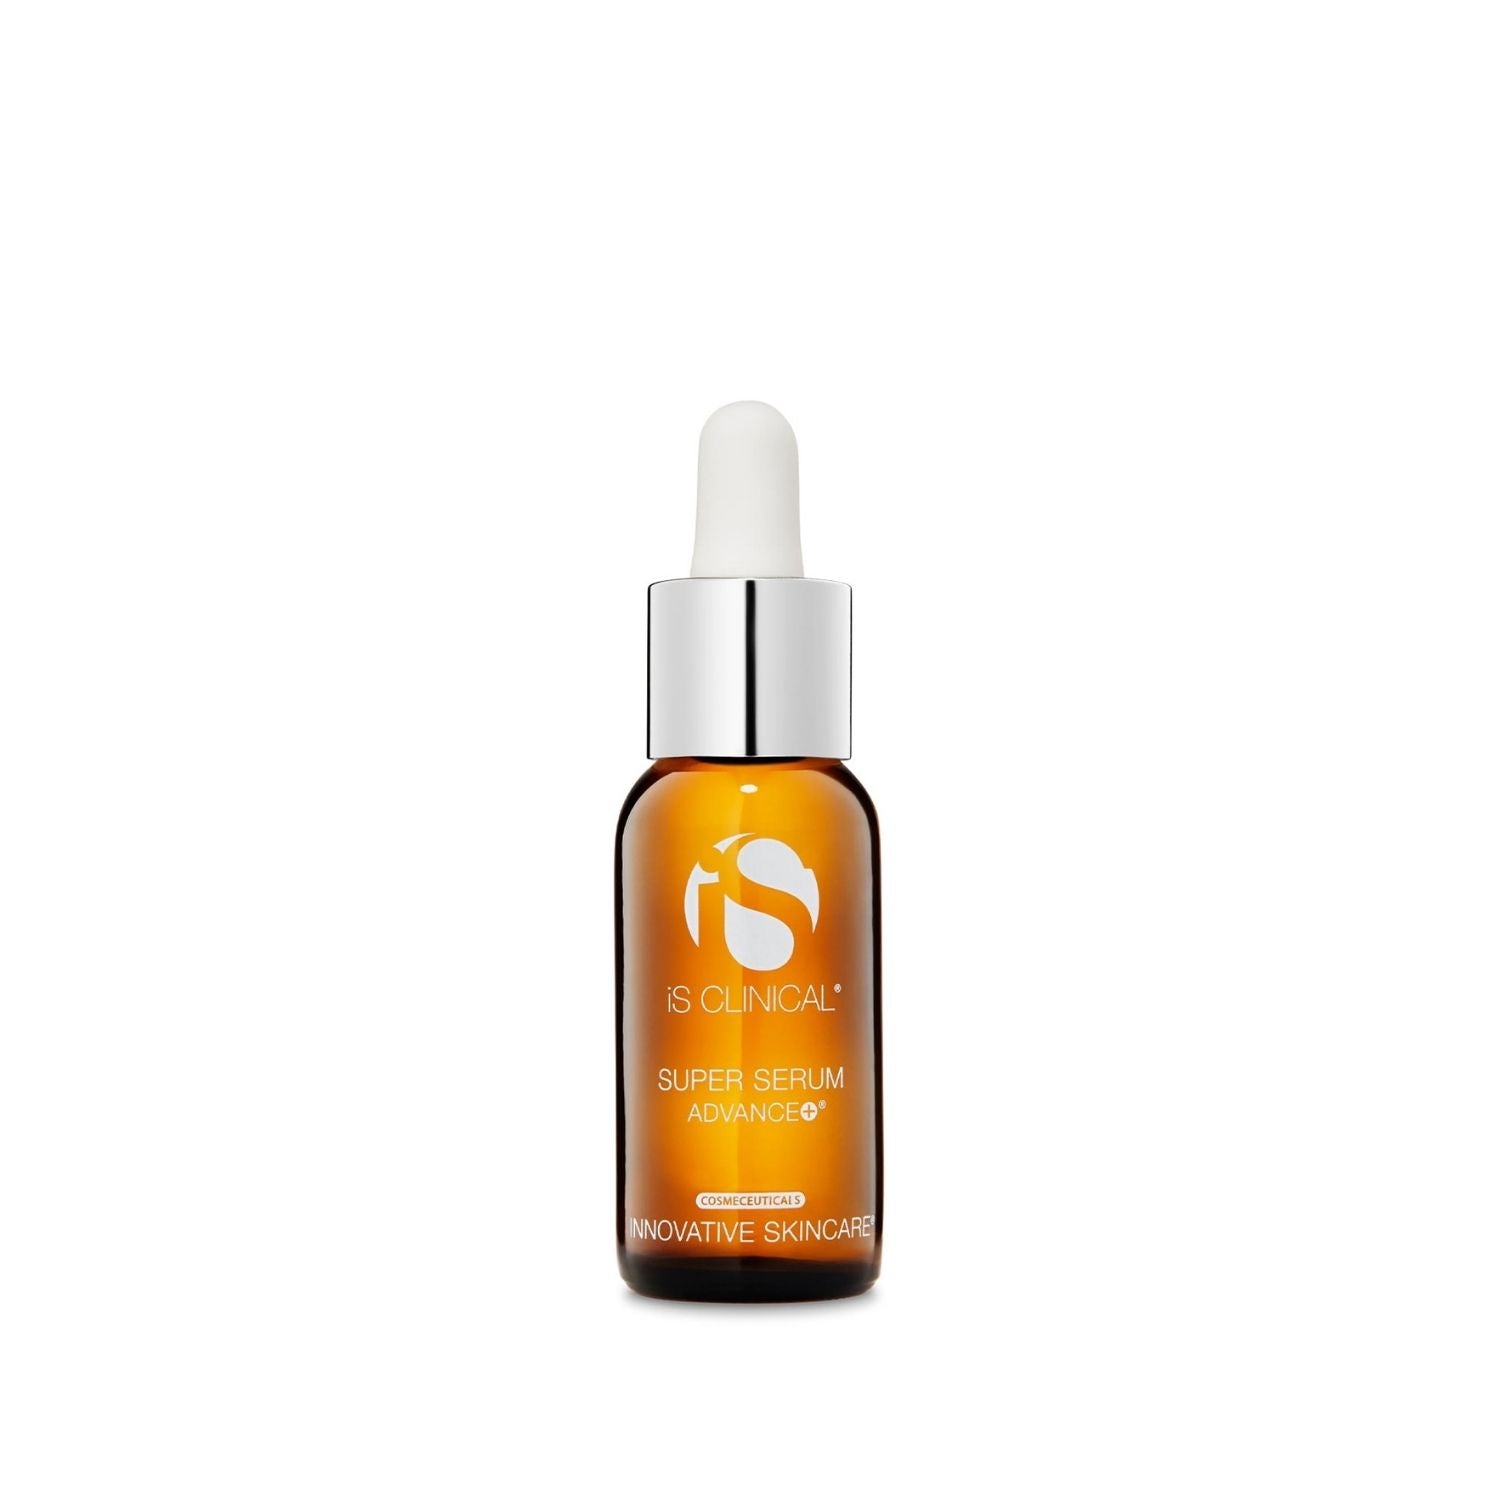 iS Clinical Super Serum Advance+ 15ml - Dr. Pen Store - iS Clinical Buy Genuine Dr Pen Products with Trust